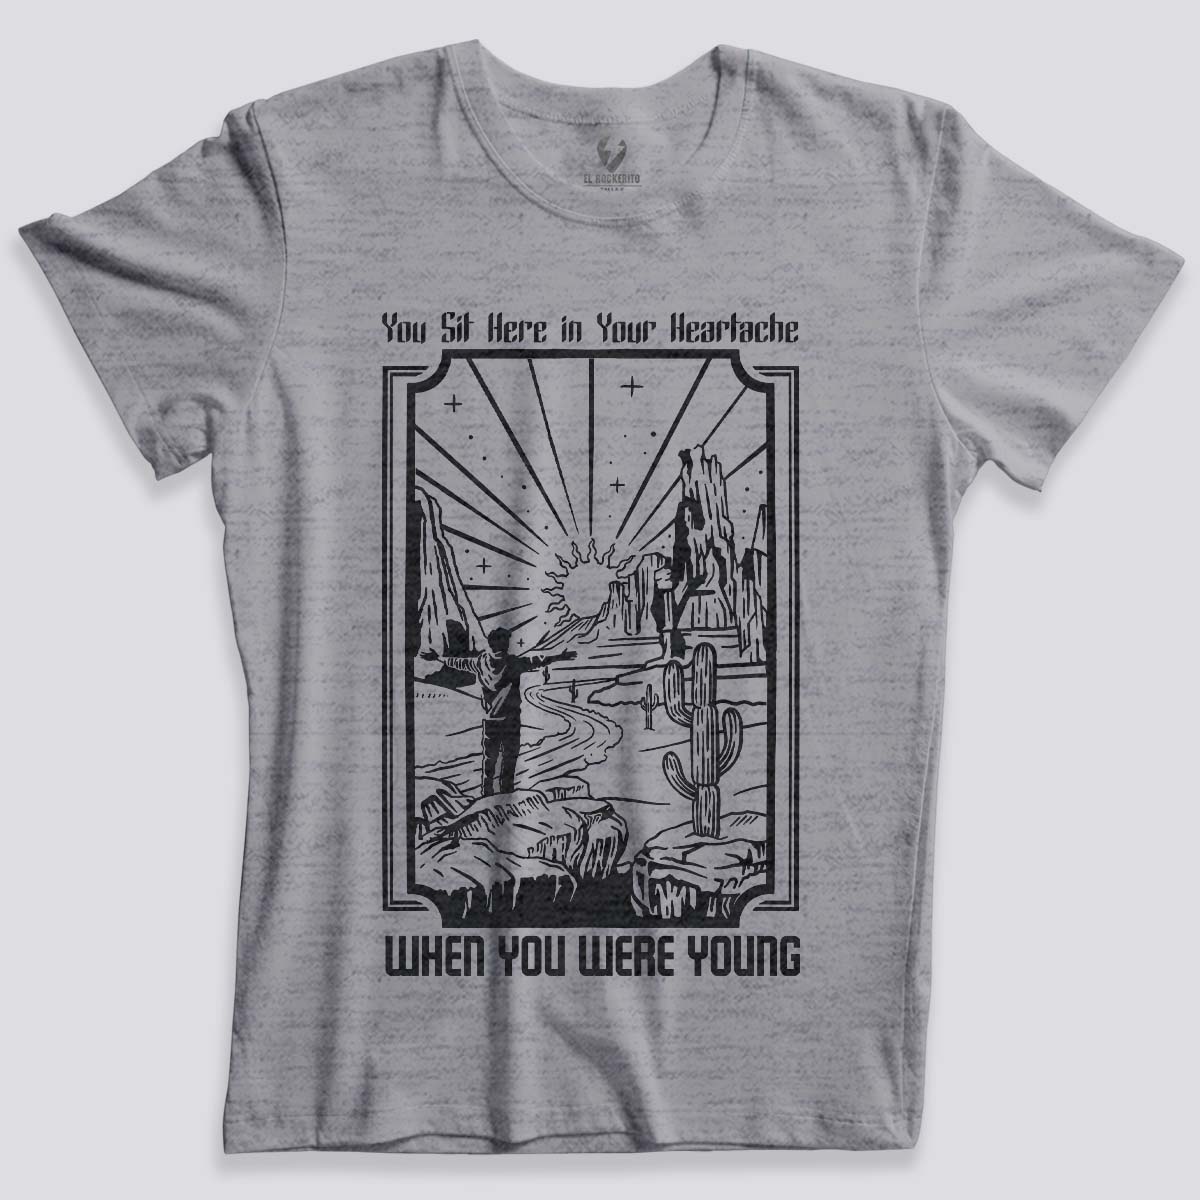 Playera algodón gris The Killers When You Were Young Rock pop